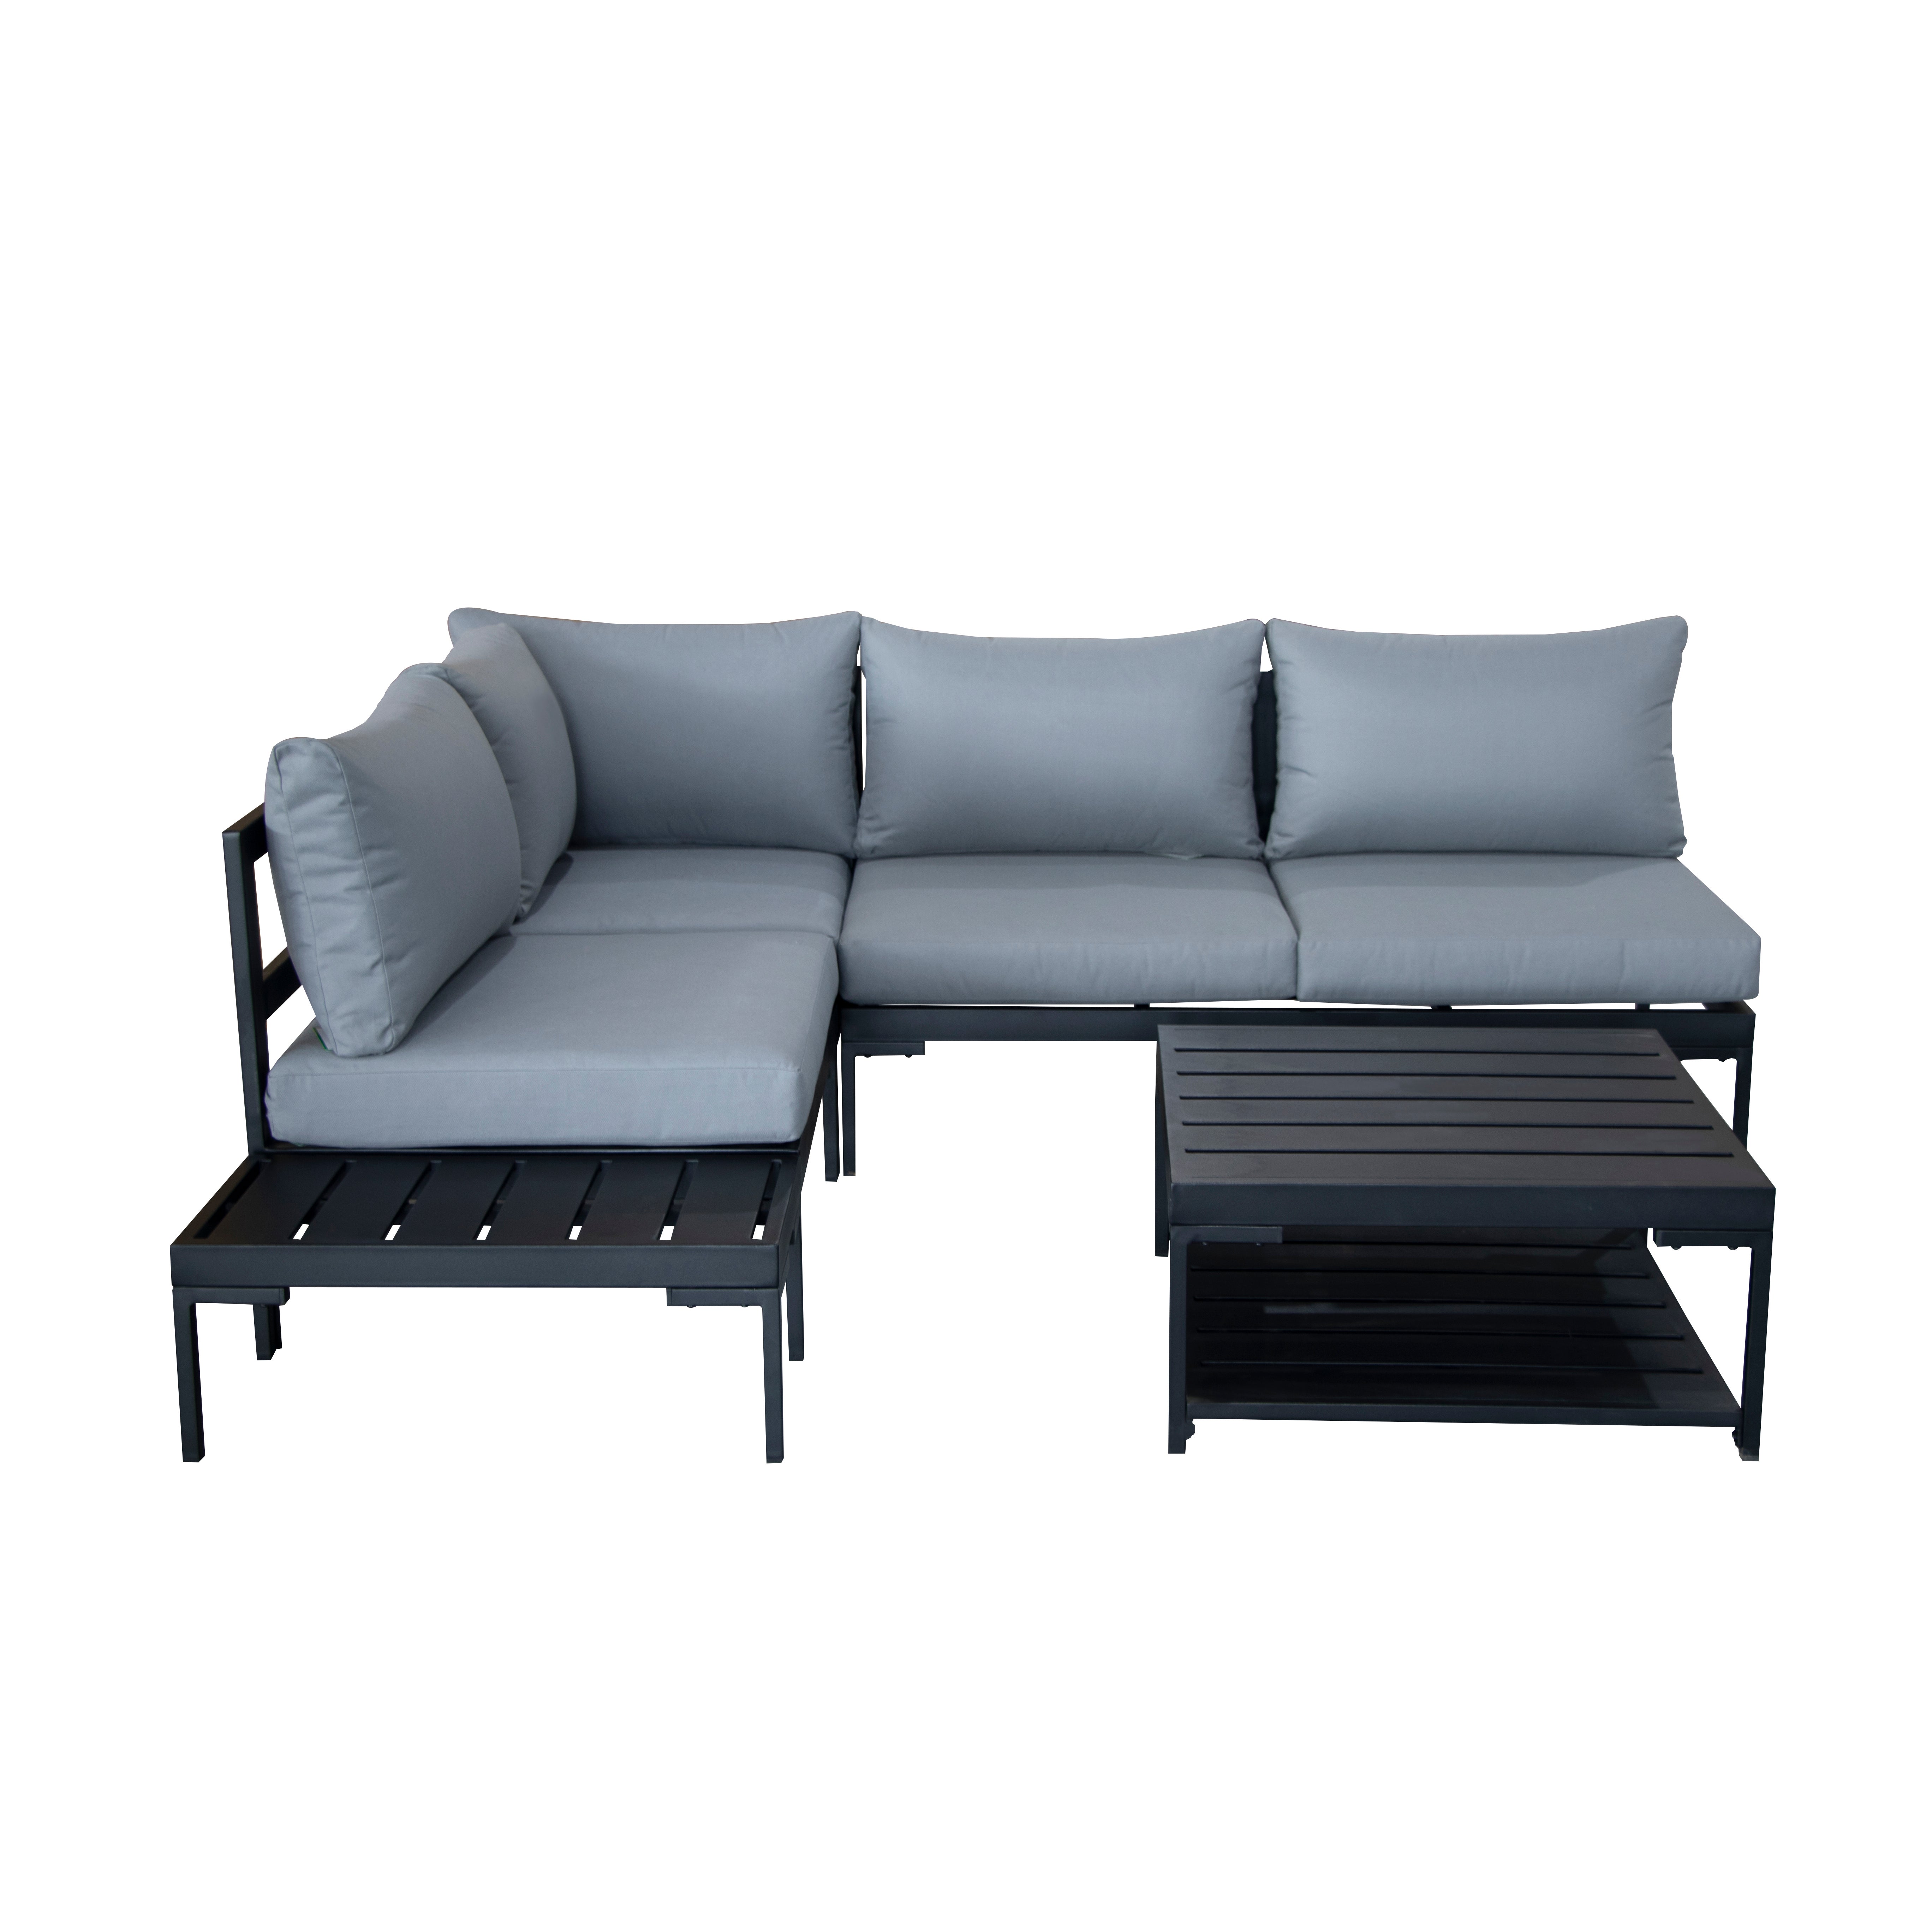 Elements Black Modular 4 Seater Corner Sofa Set With Coffee And Side Tables Black